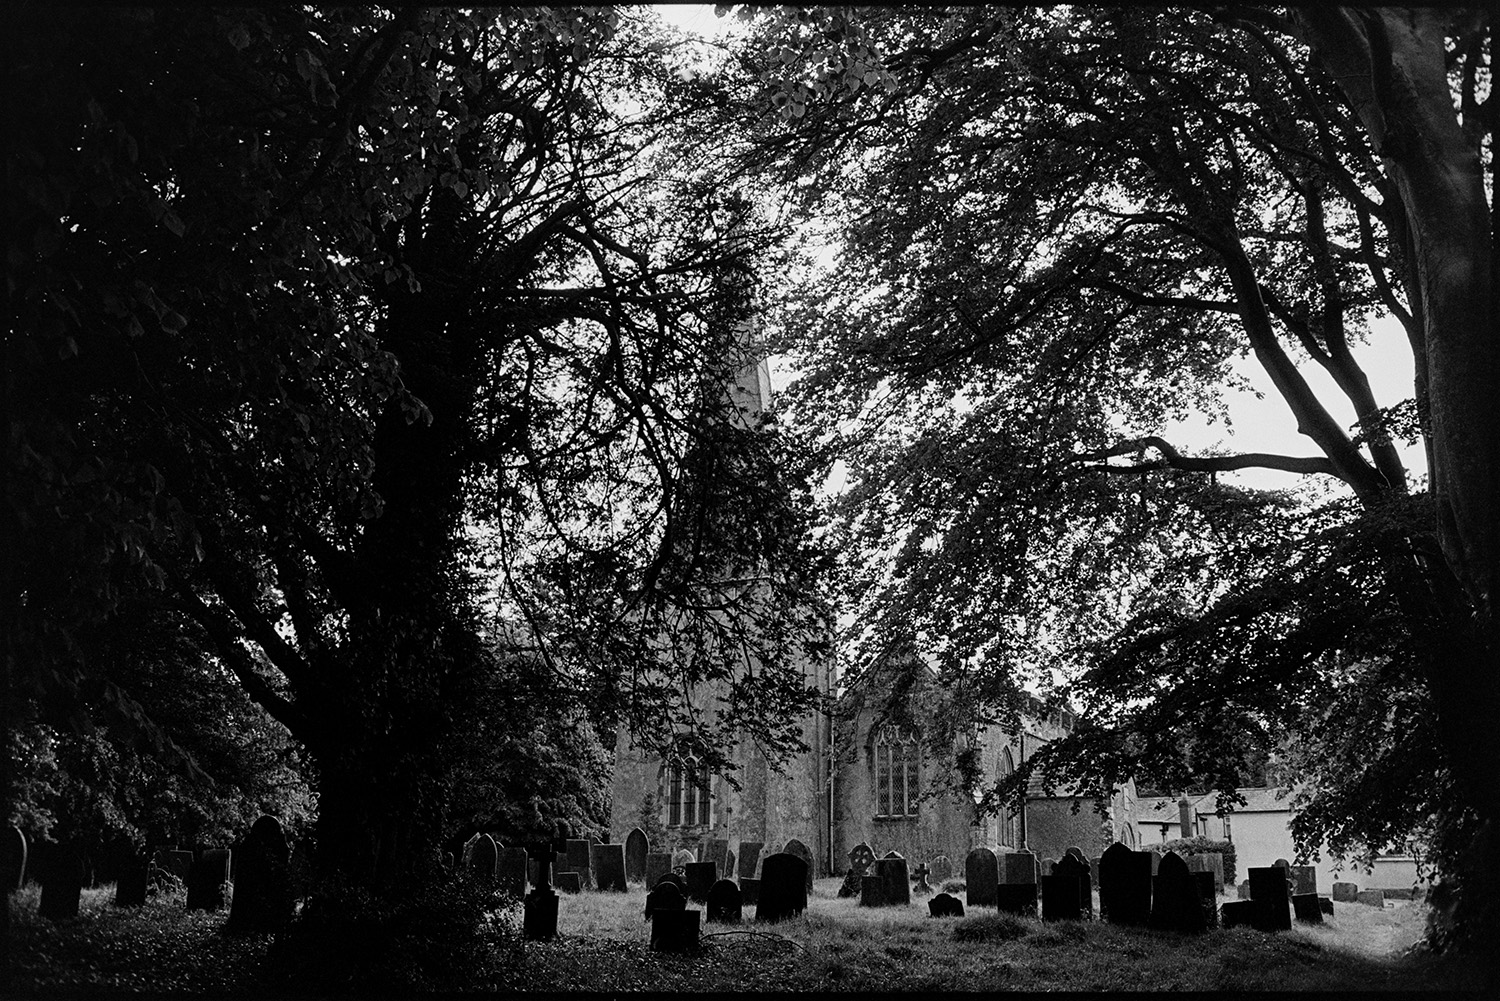 Village church and graveyard amongst trees.
[Kings Nympton Church and churchyard viewed through trees. Gravestones and the church spire are visible.]